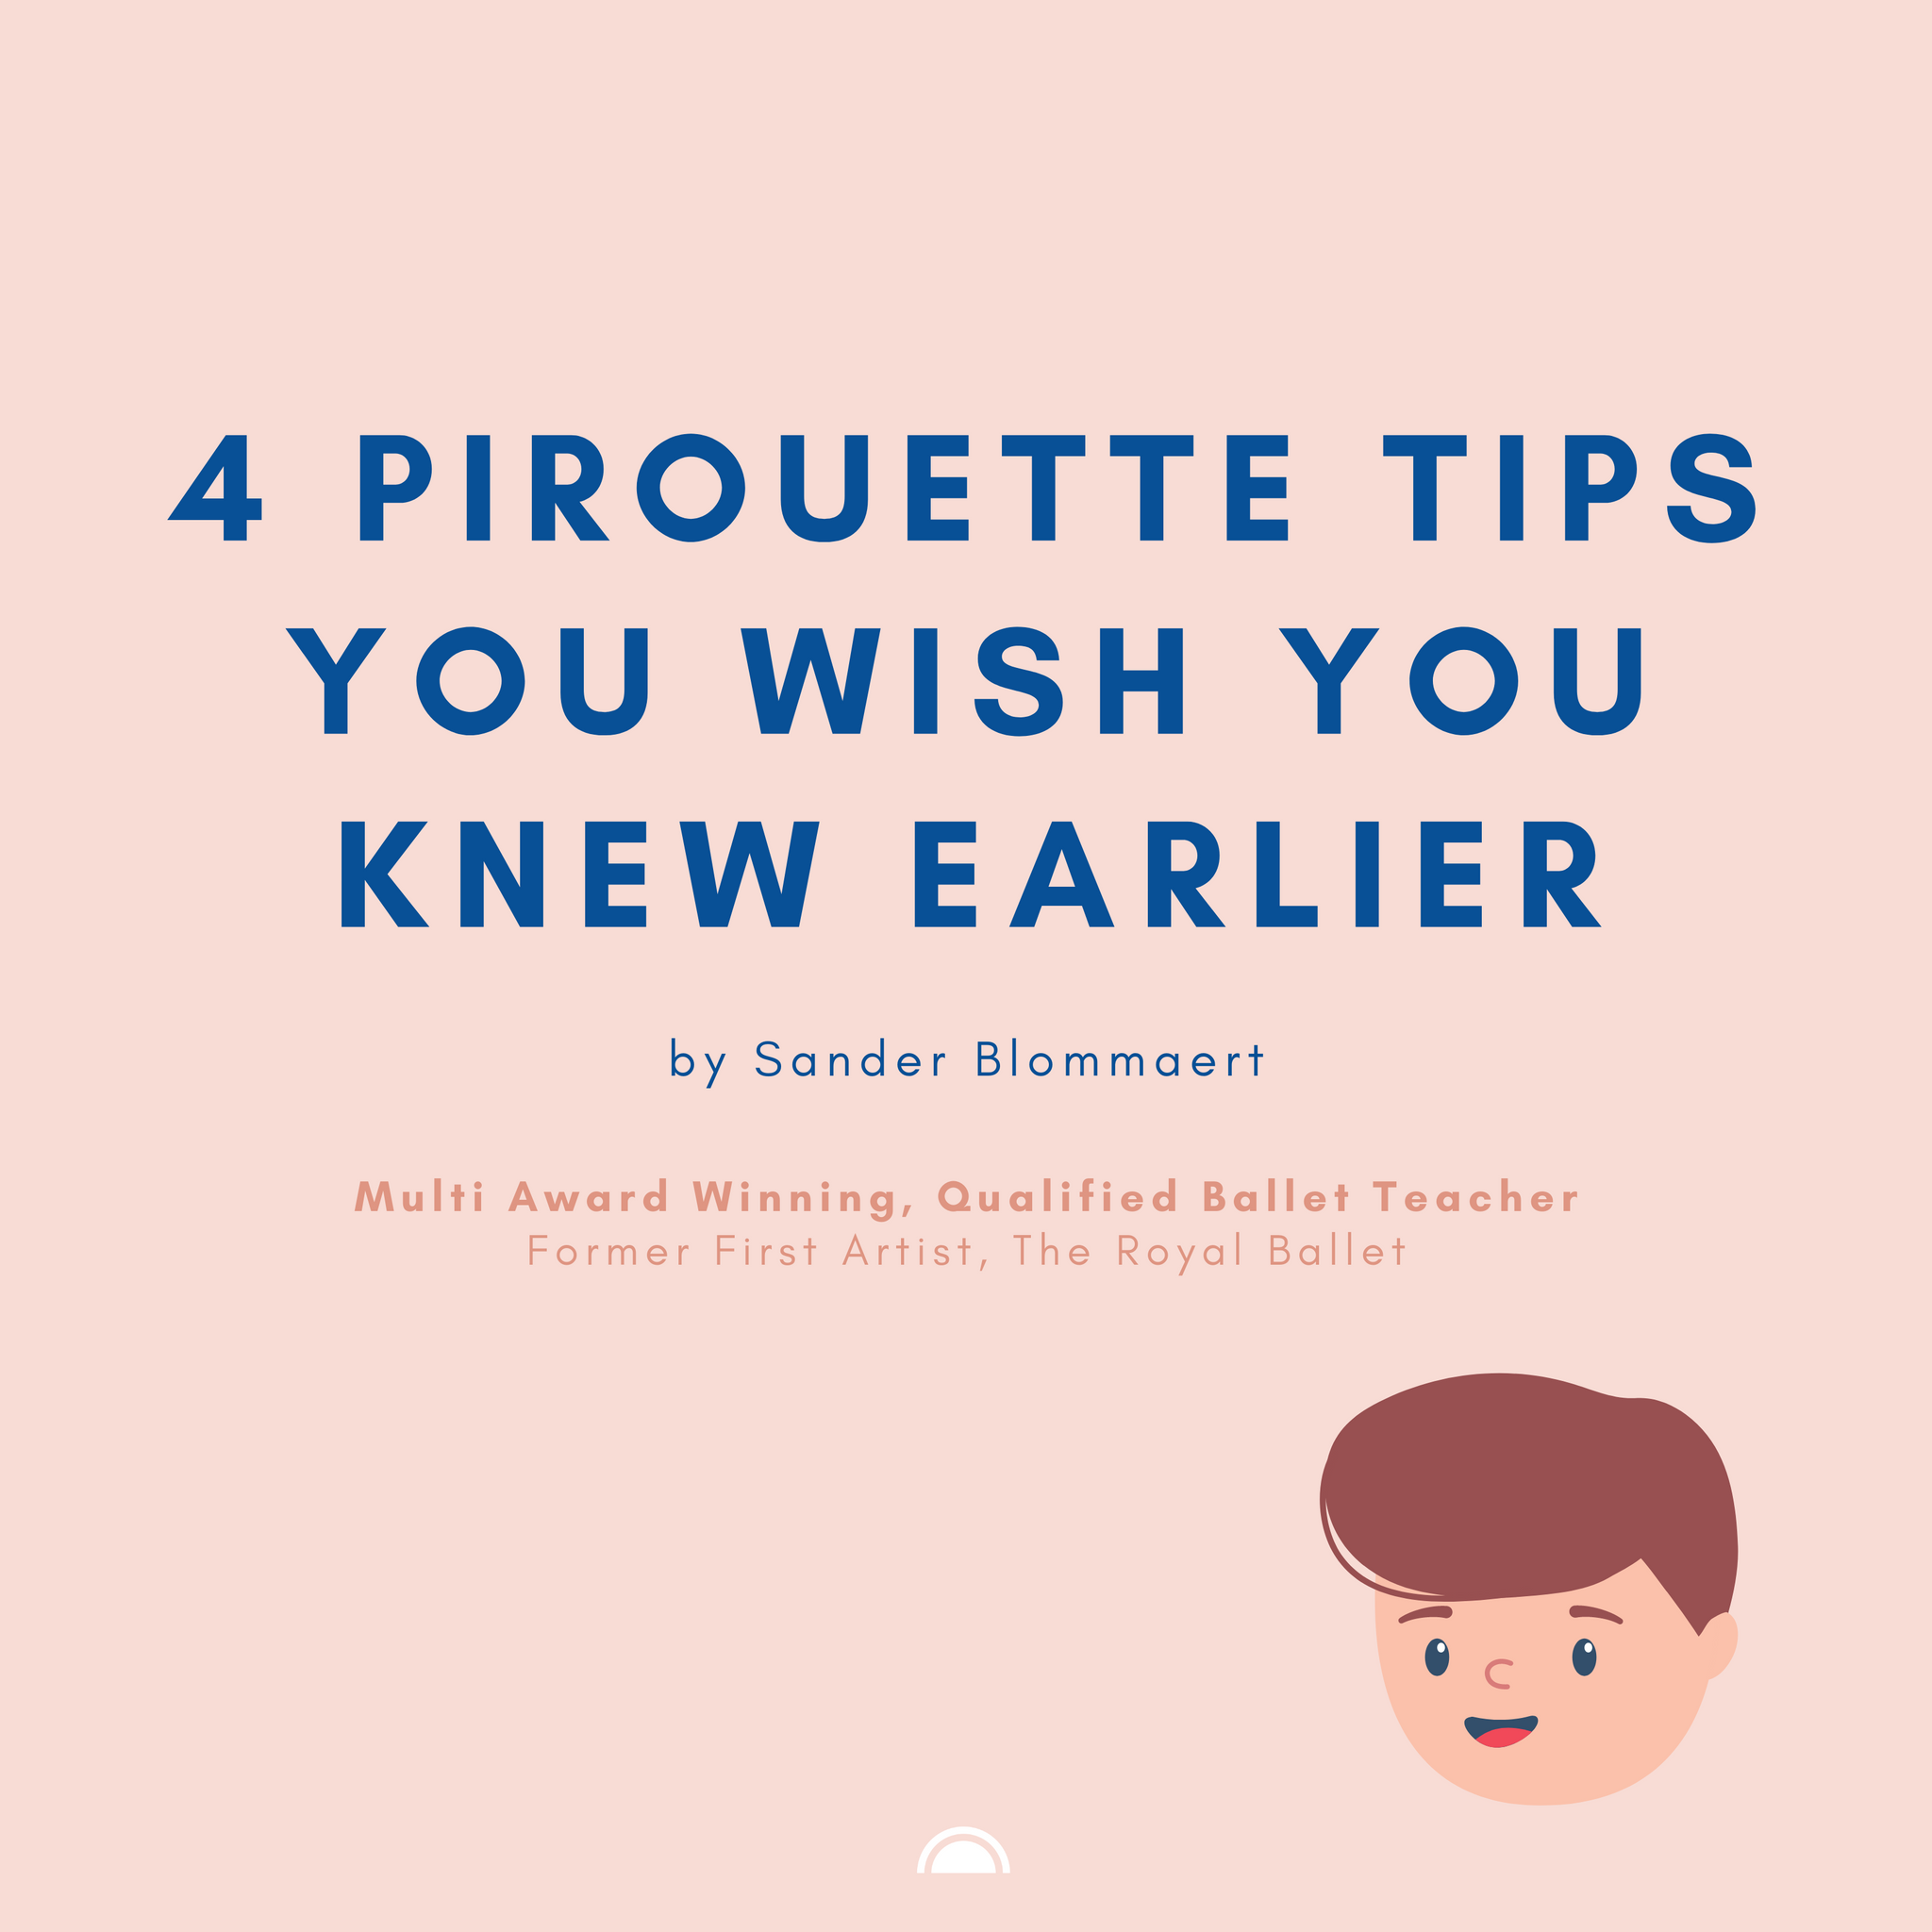 4 Pirouette tips you wish you knew earlier (by Sander Blommaert)